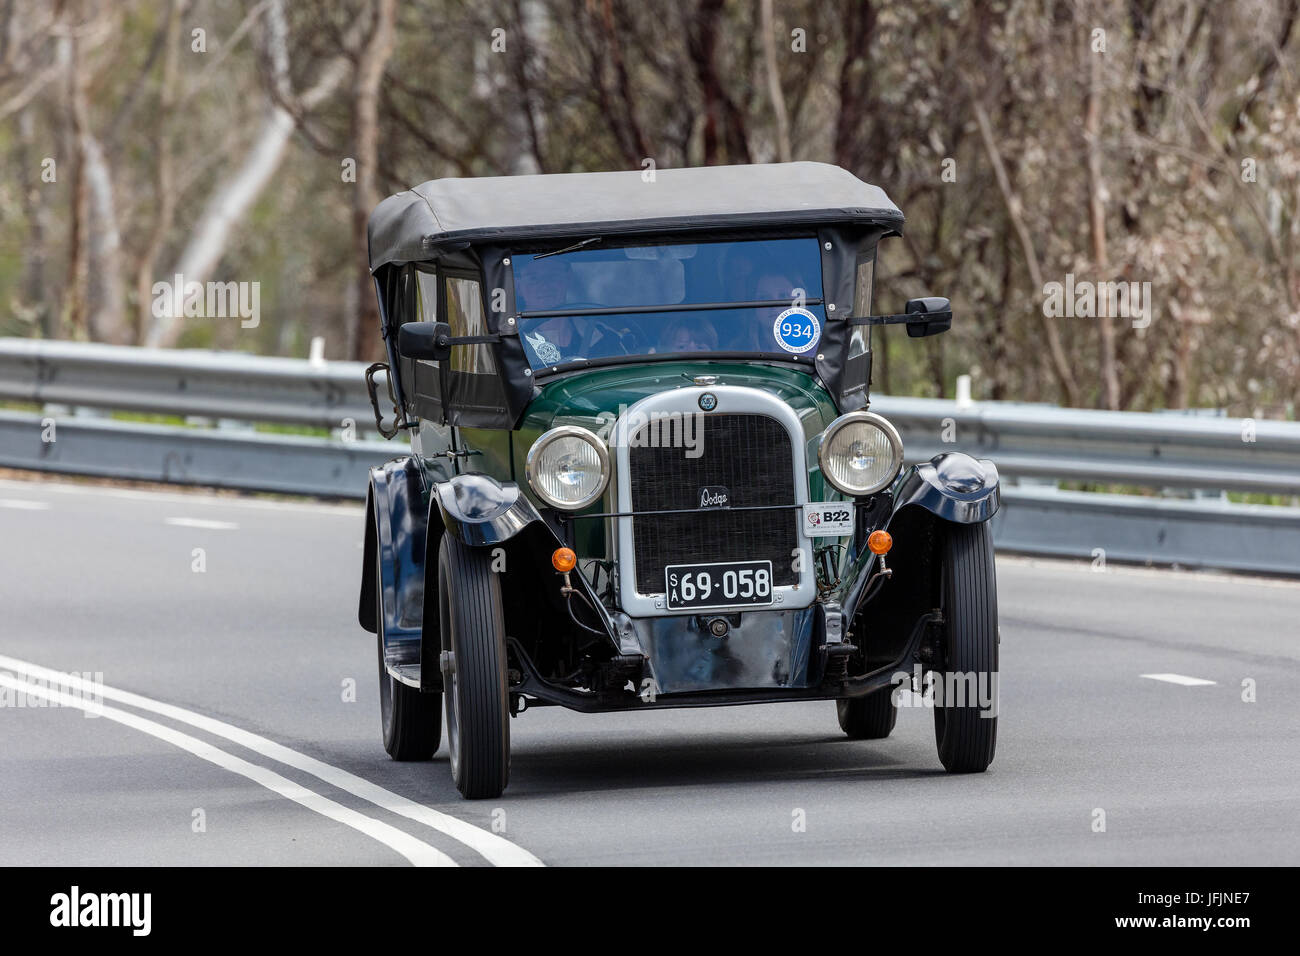 Vintage 1925 Dodge Brothers 1925 Tourer driving on country roads near the town of Birdwood, South Australia. Stock Photo